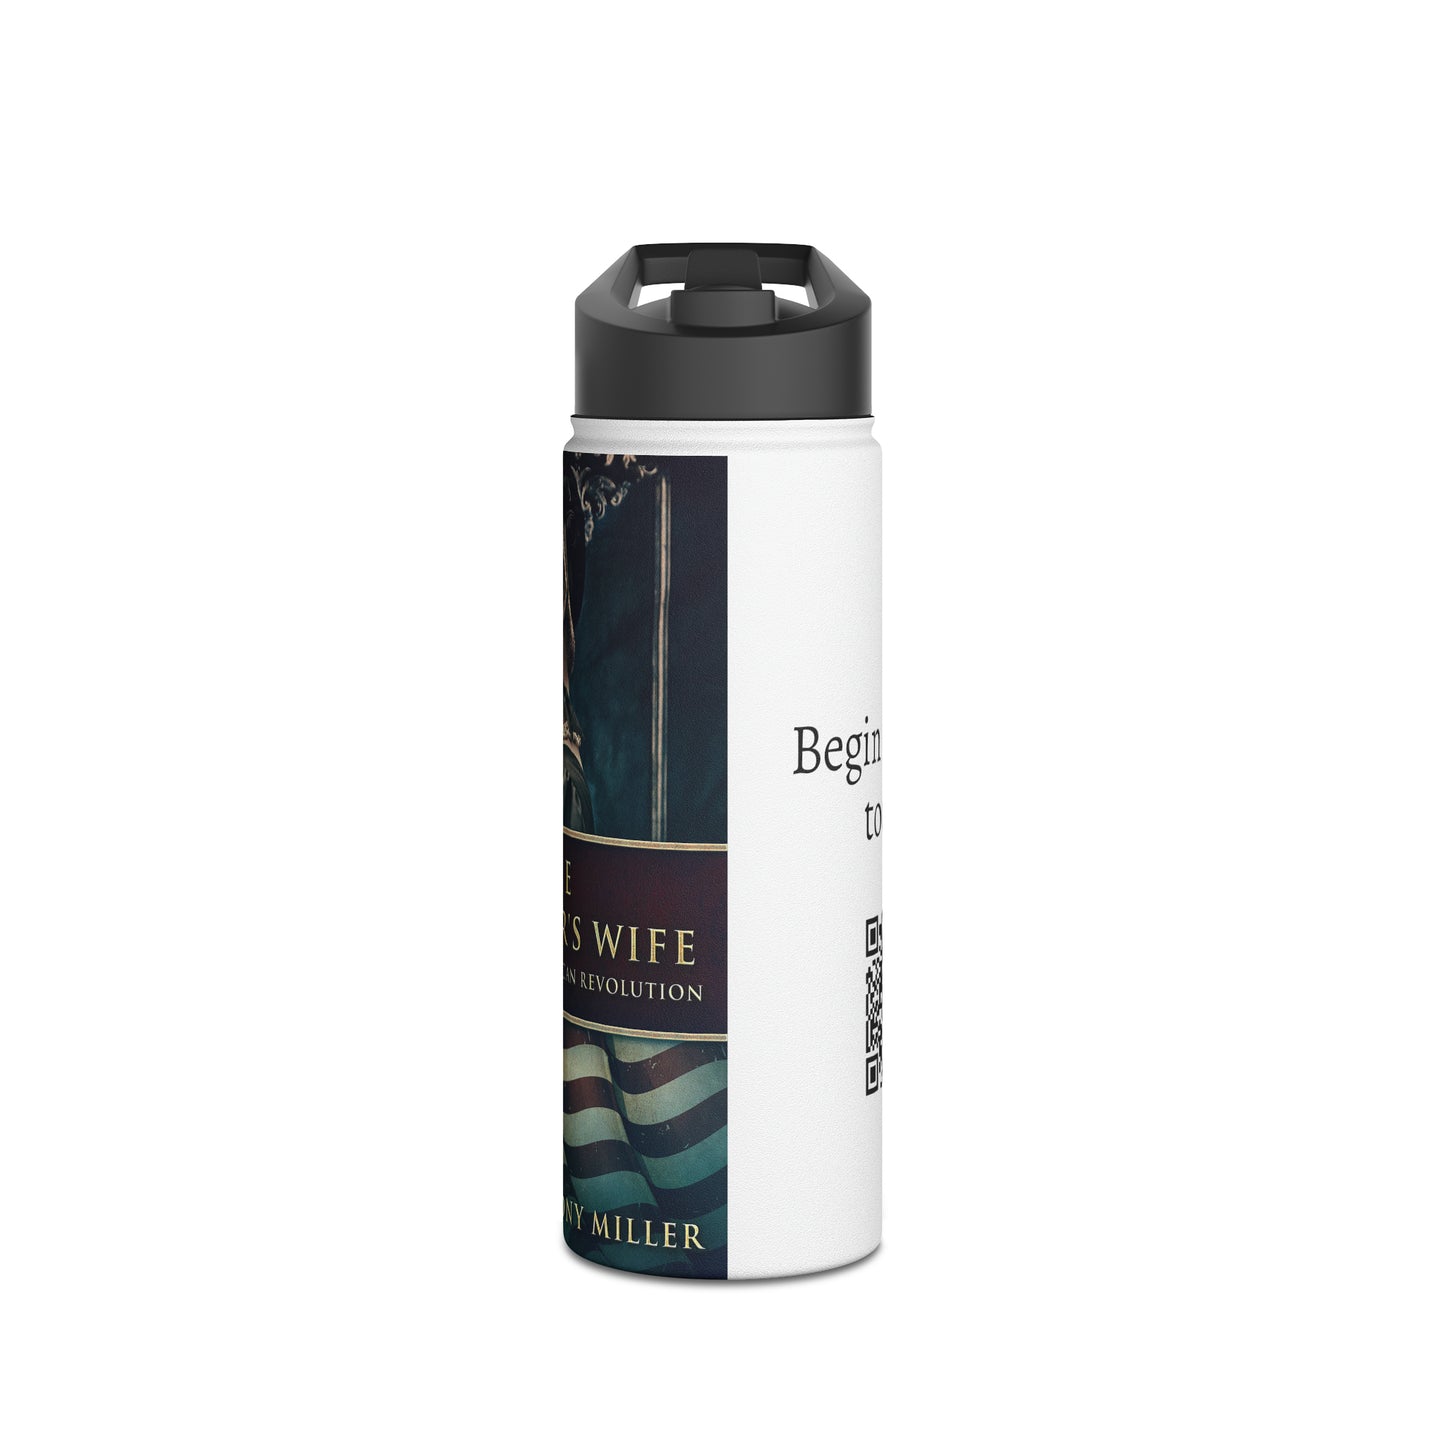 The Minister's Wife - Stainless Steel Water Bottle